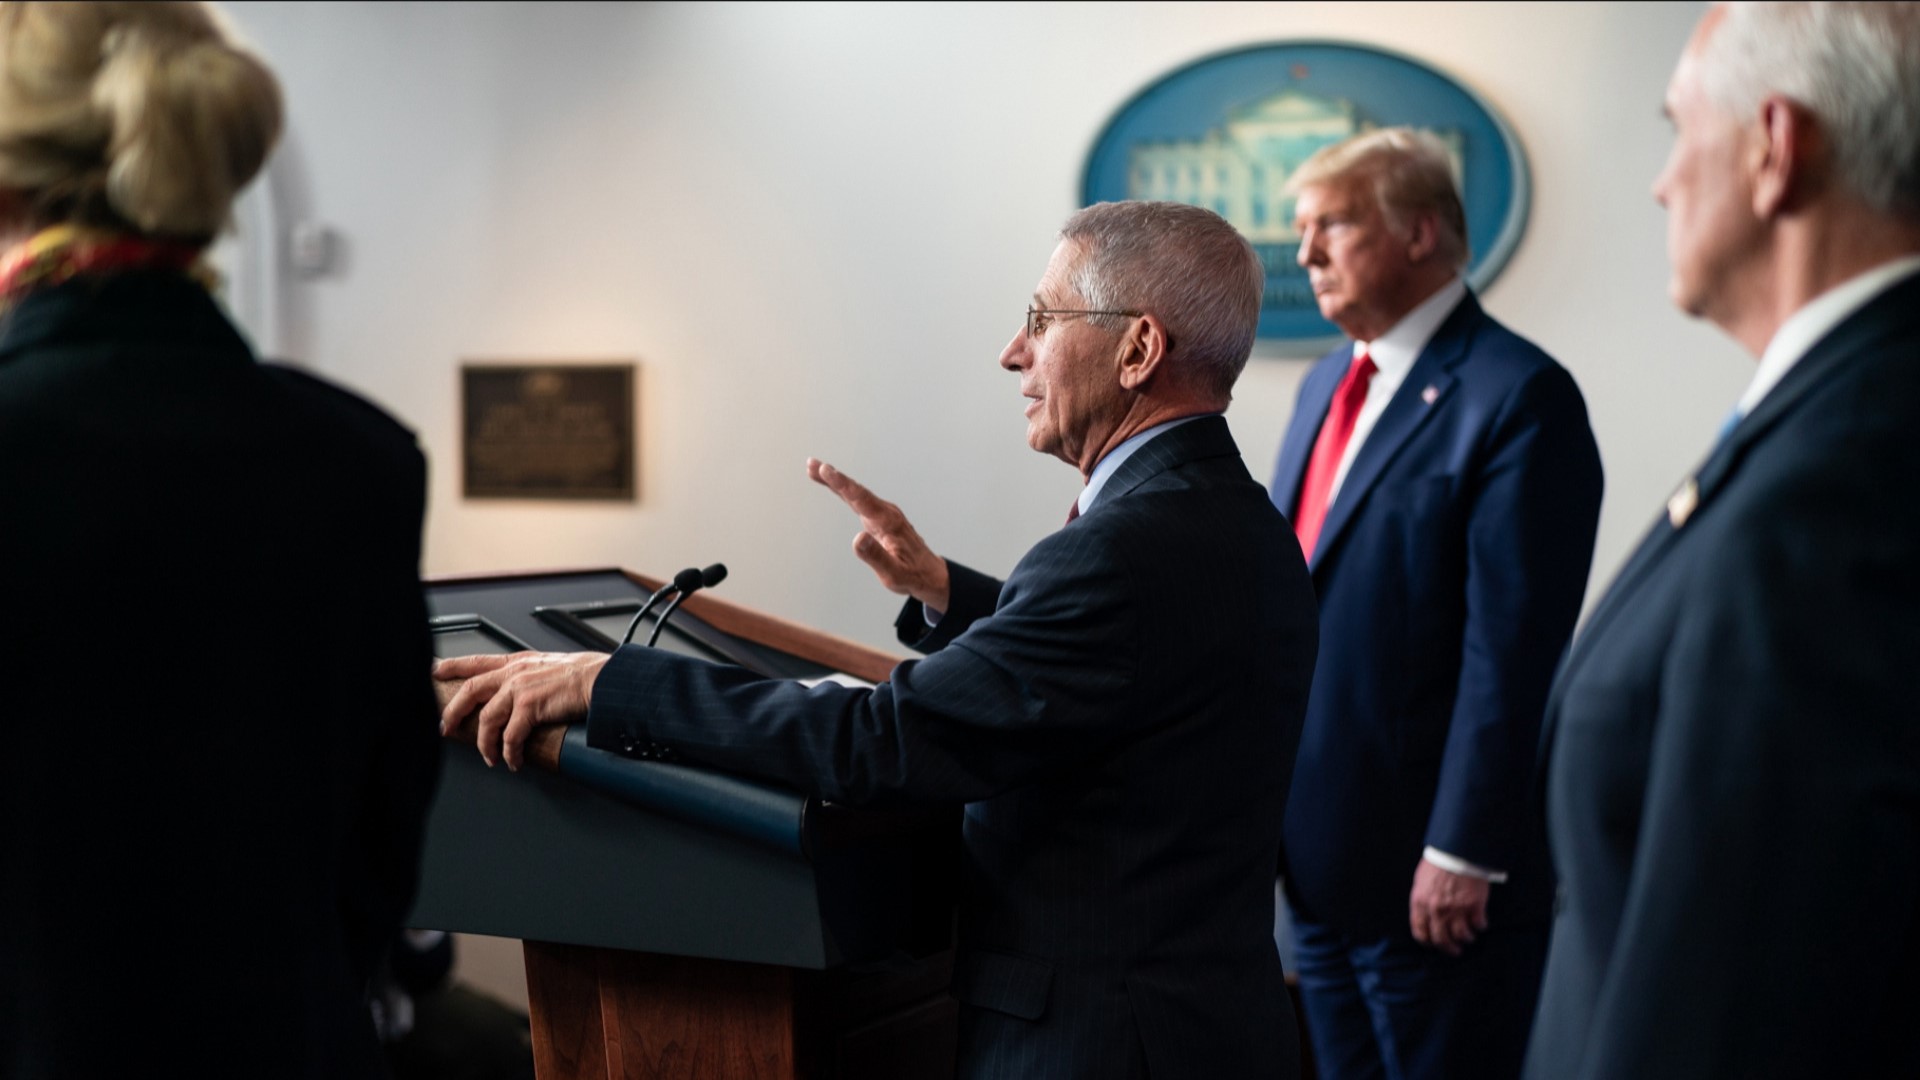 Dr. Anthony Fauci's response to the coronavirus is a whopping 27 percentage points higher with voters than their approval for President Trump's dealing with the pandemic. Veuer's Justin Kircher has the numbers.